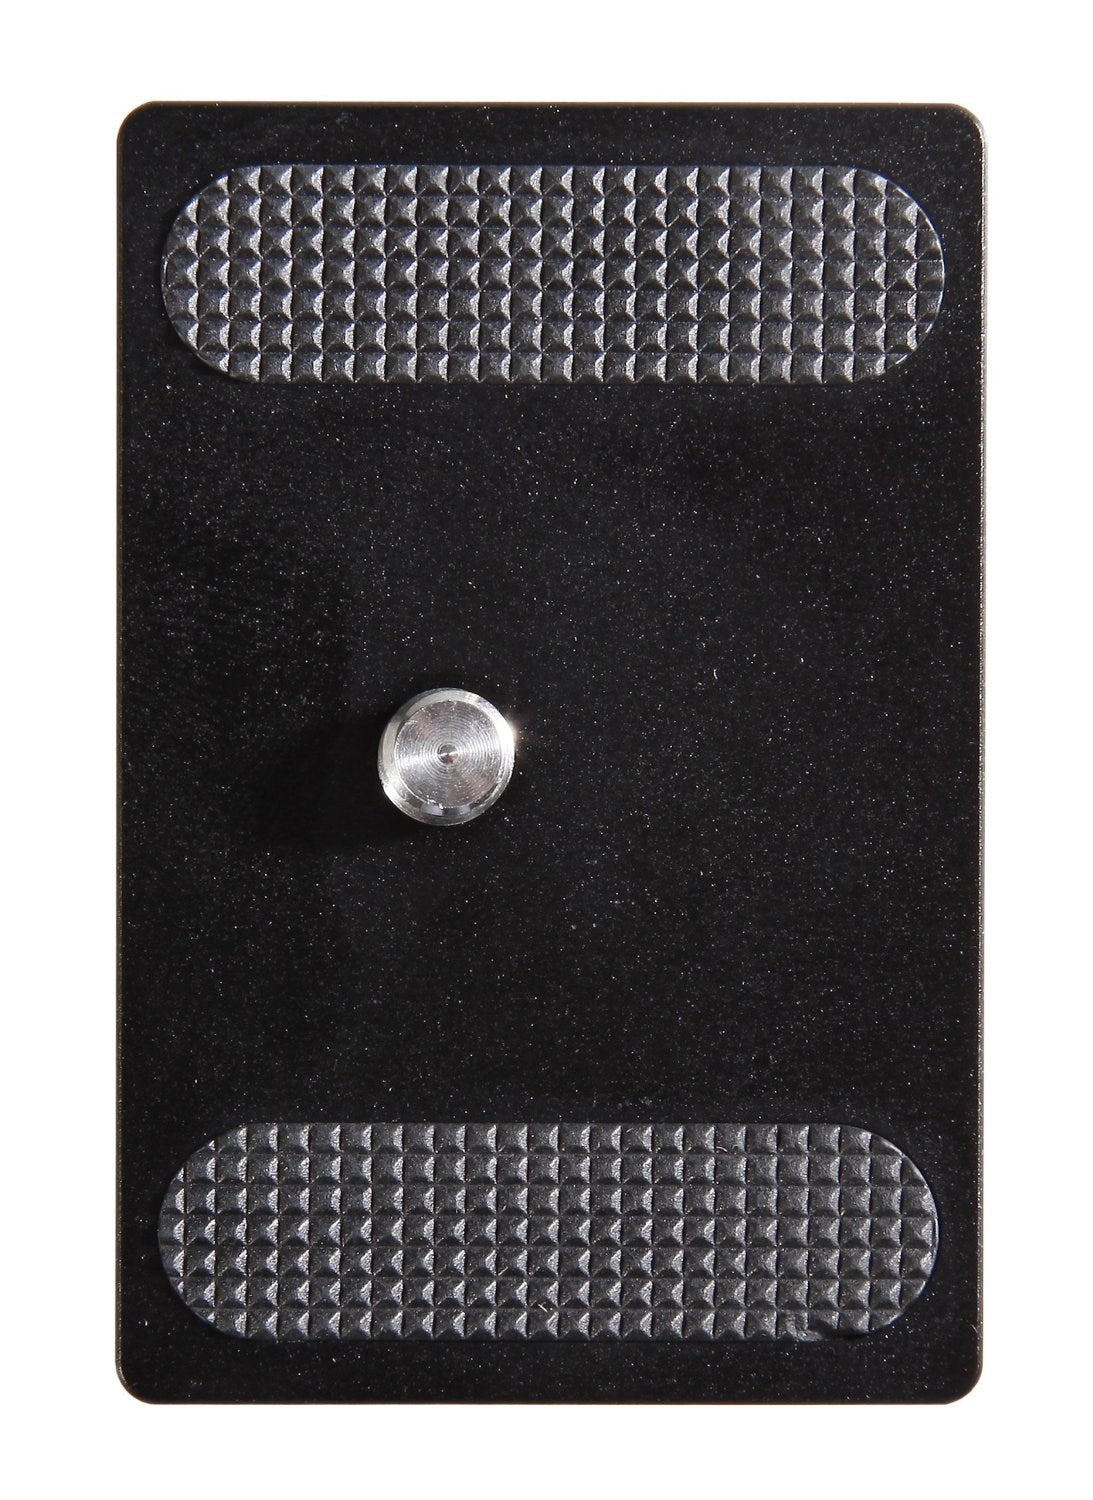 Product Image of Vanguard QS-60 Quick Shoe Quick Release Plate